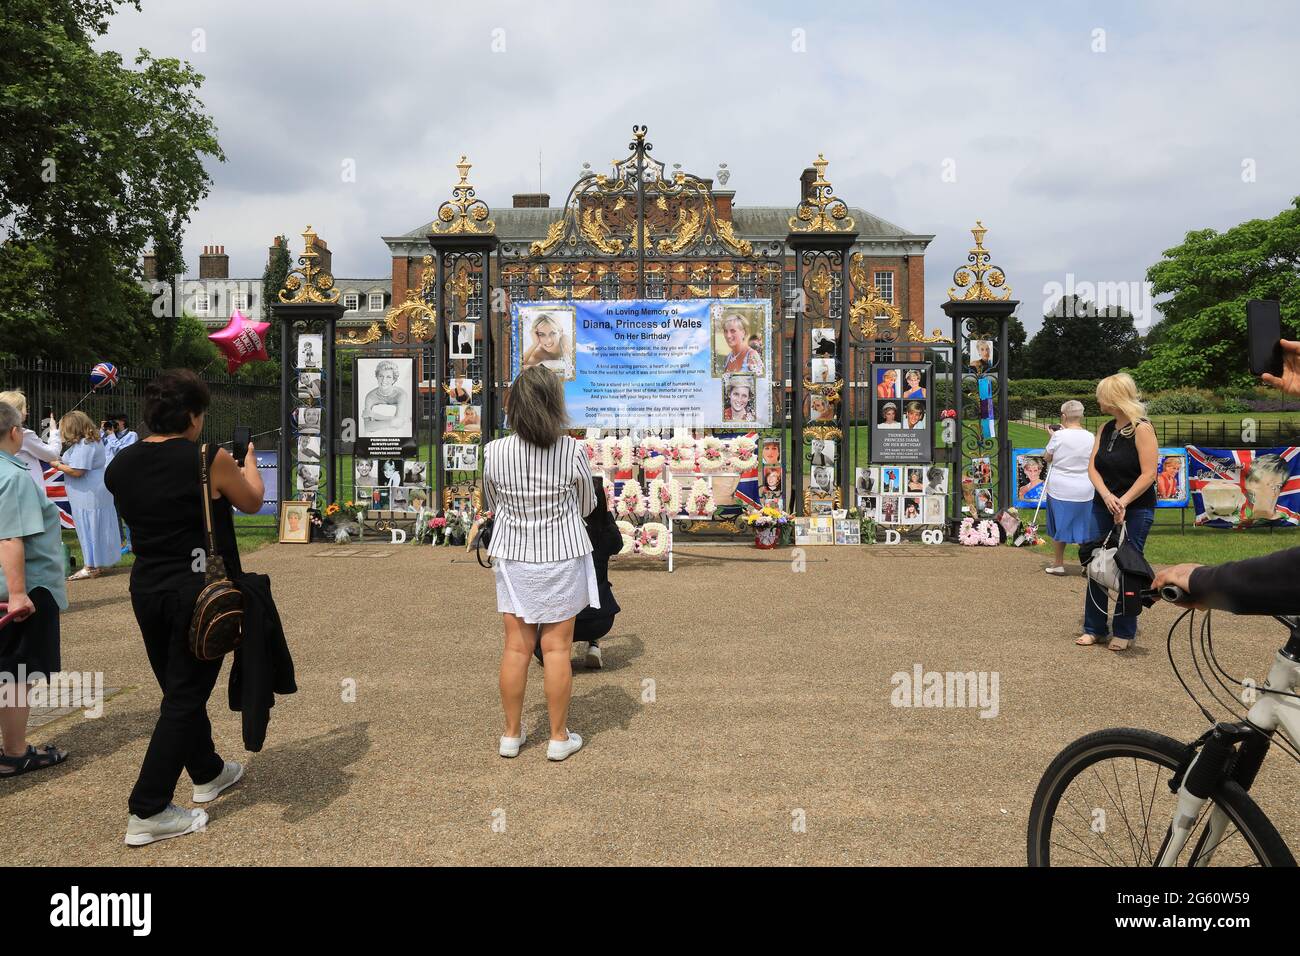 London, UK, July 1st 2021. On what would have been Princess Diana's 60th birthday and the unveiling of a new statue of her by Princes William and Harry, loyal fans decorated the gates of Kensington Palace with photos, flowers and balloons. Monica Wells/Alamy Live News Stock Photo